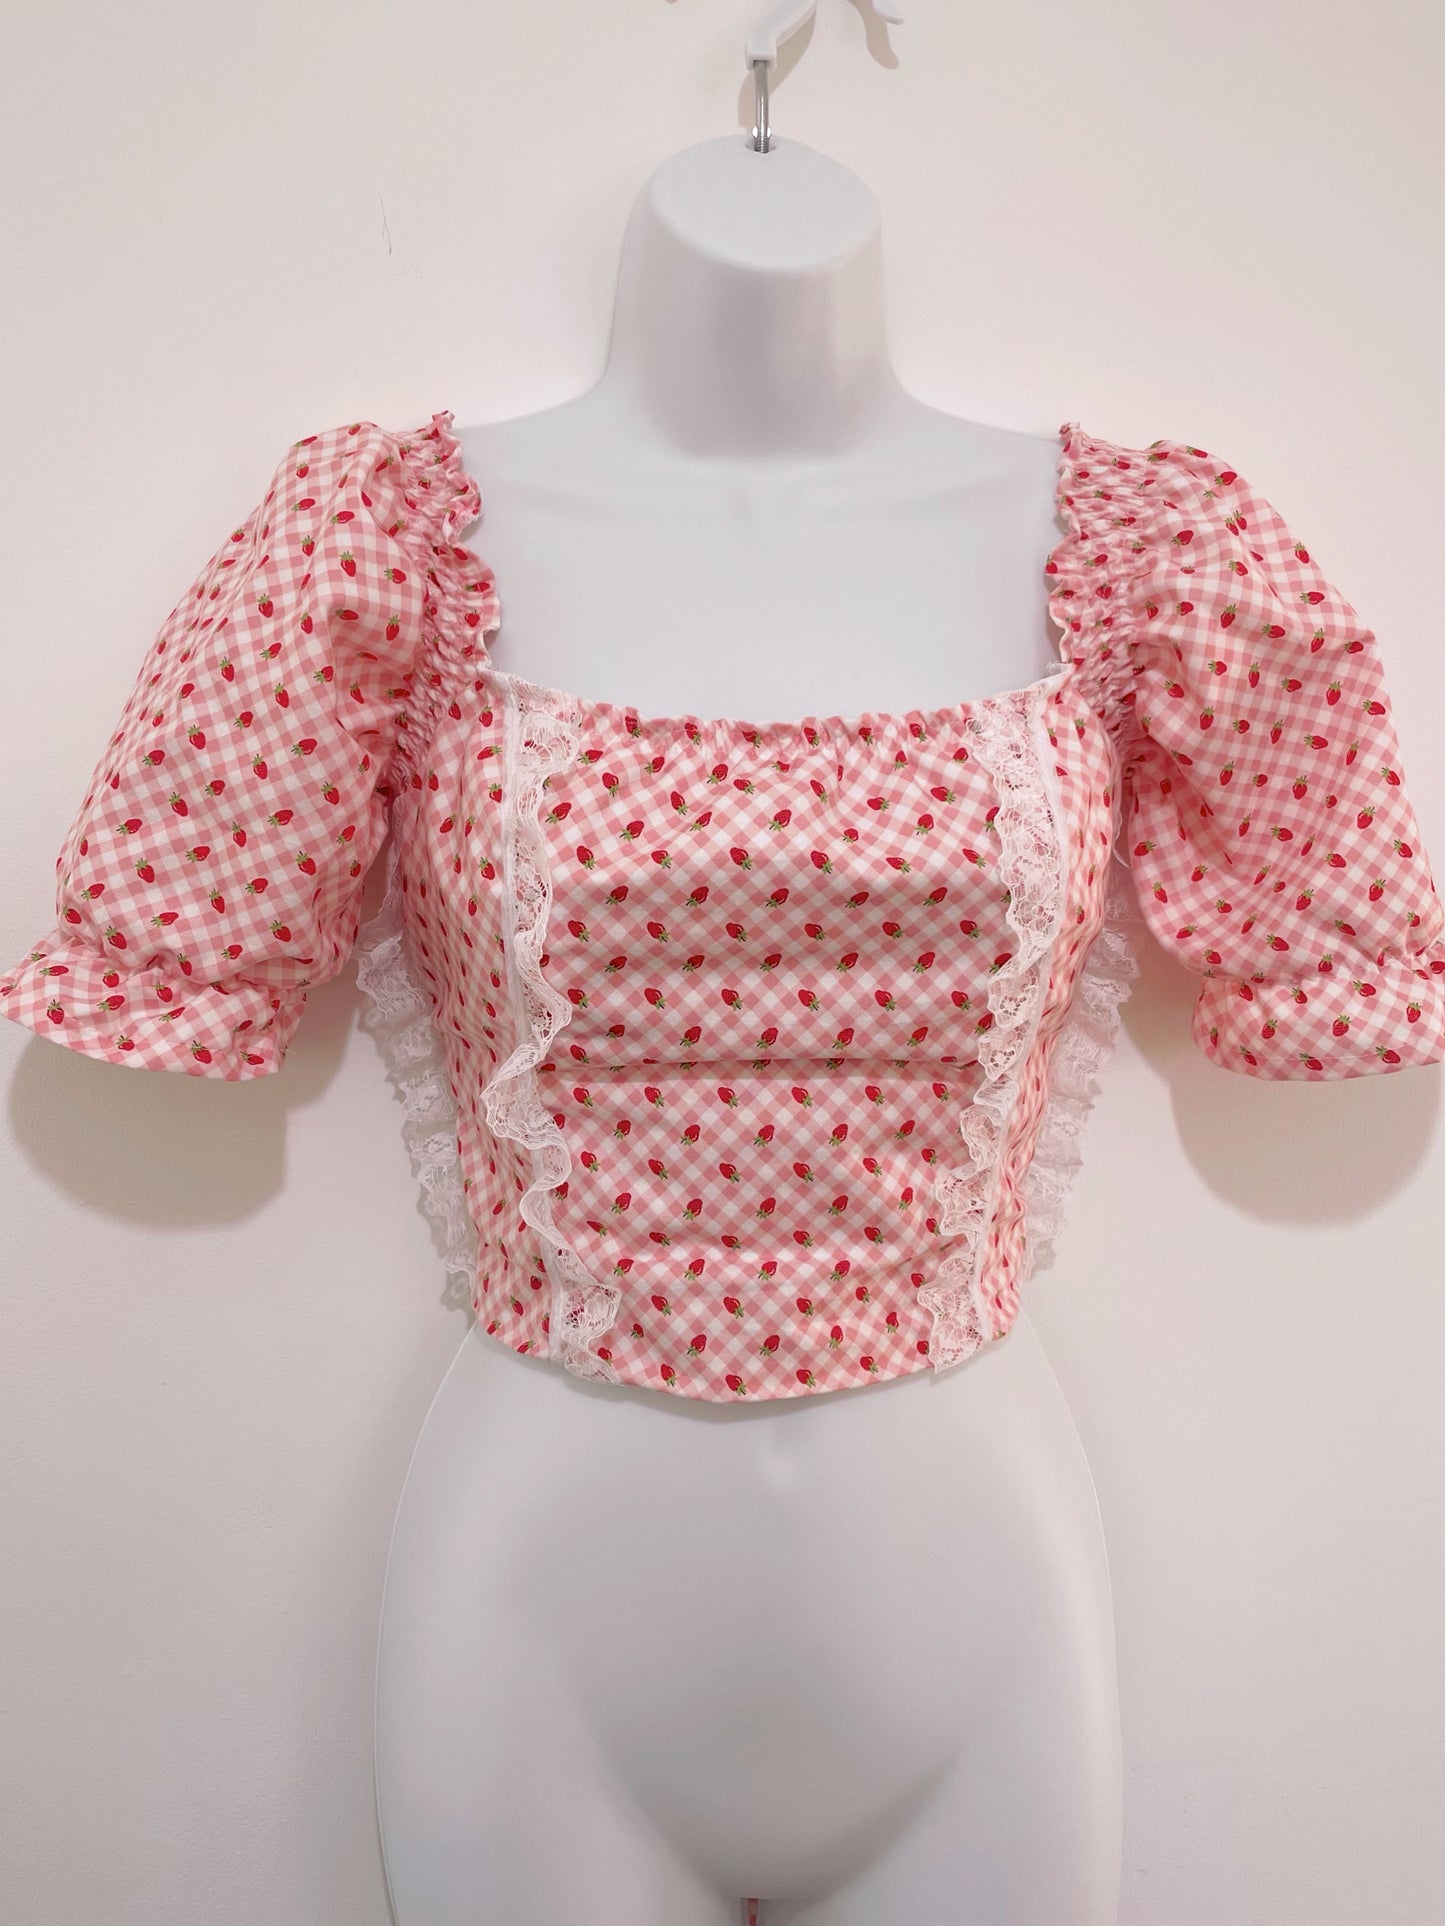 Strawberry dolly top - UK8 - riabelle.bespoke